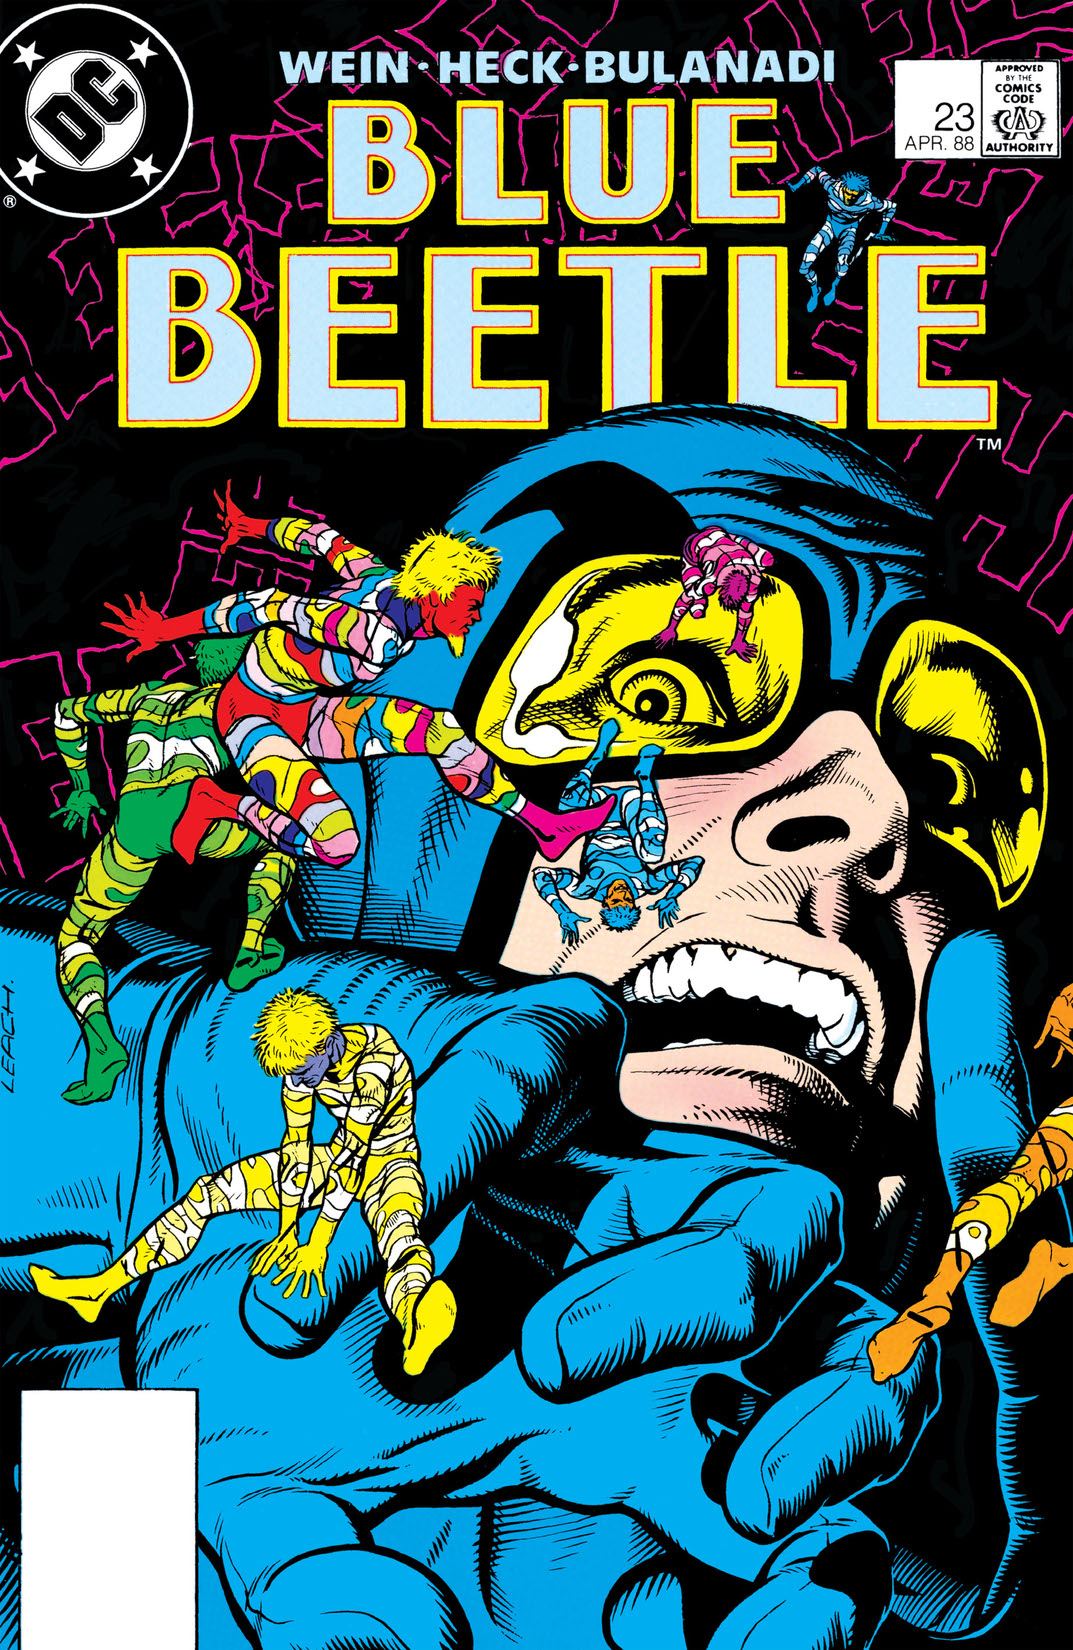 Blue Beetle (1986-) #23 preview images